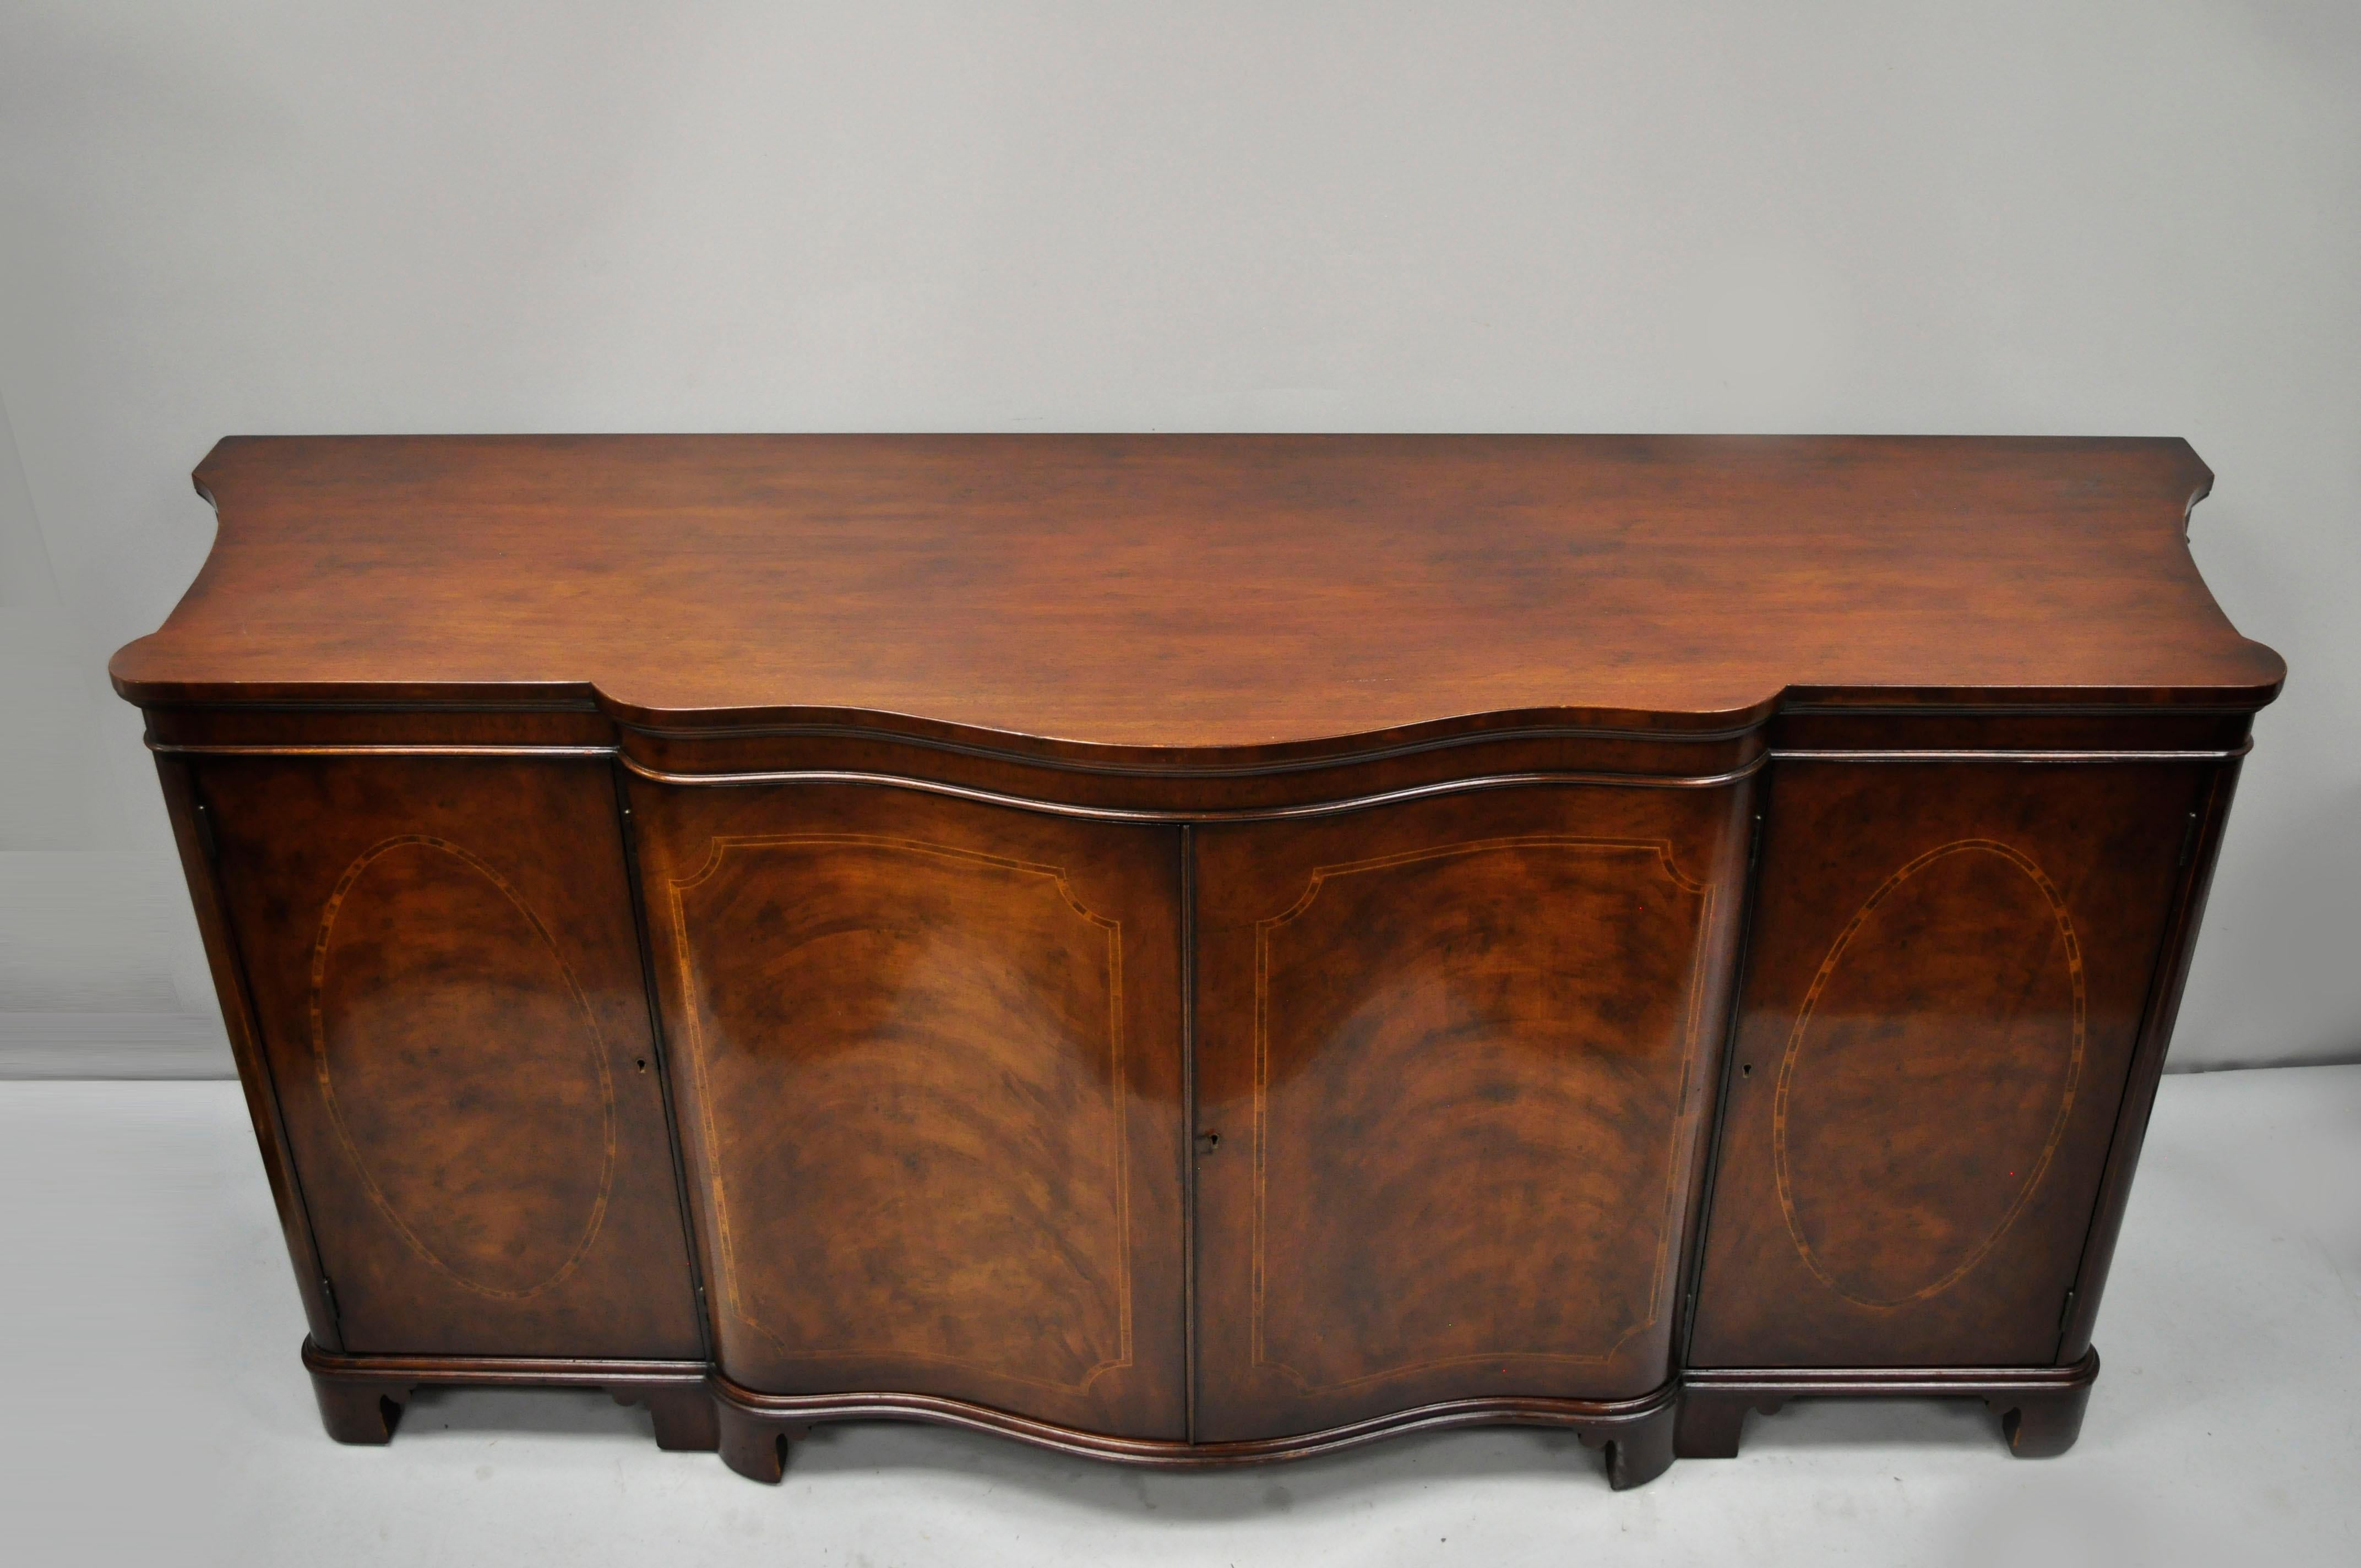 Baker Antique Flame Mahogany Inlaid Serpentine Sideboard Buffet Credenza Cabinet 3